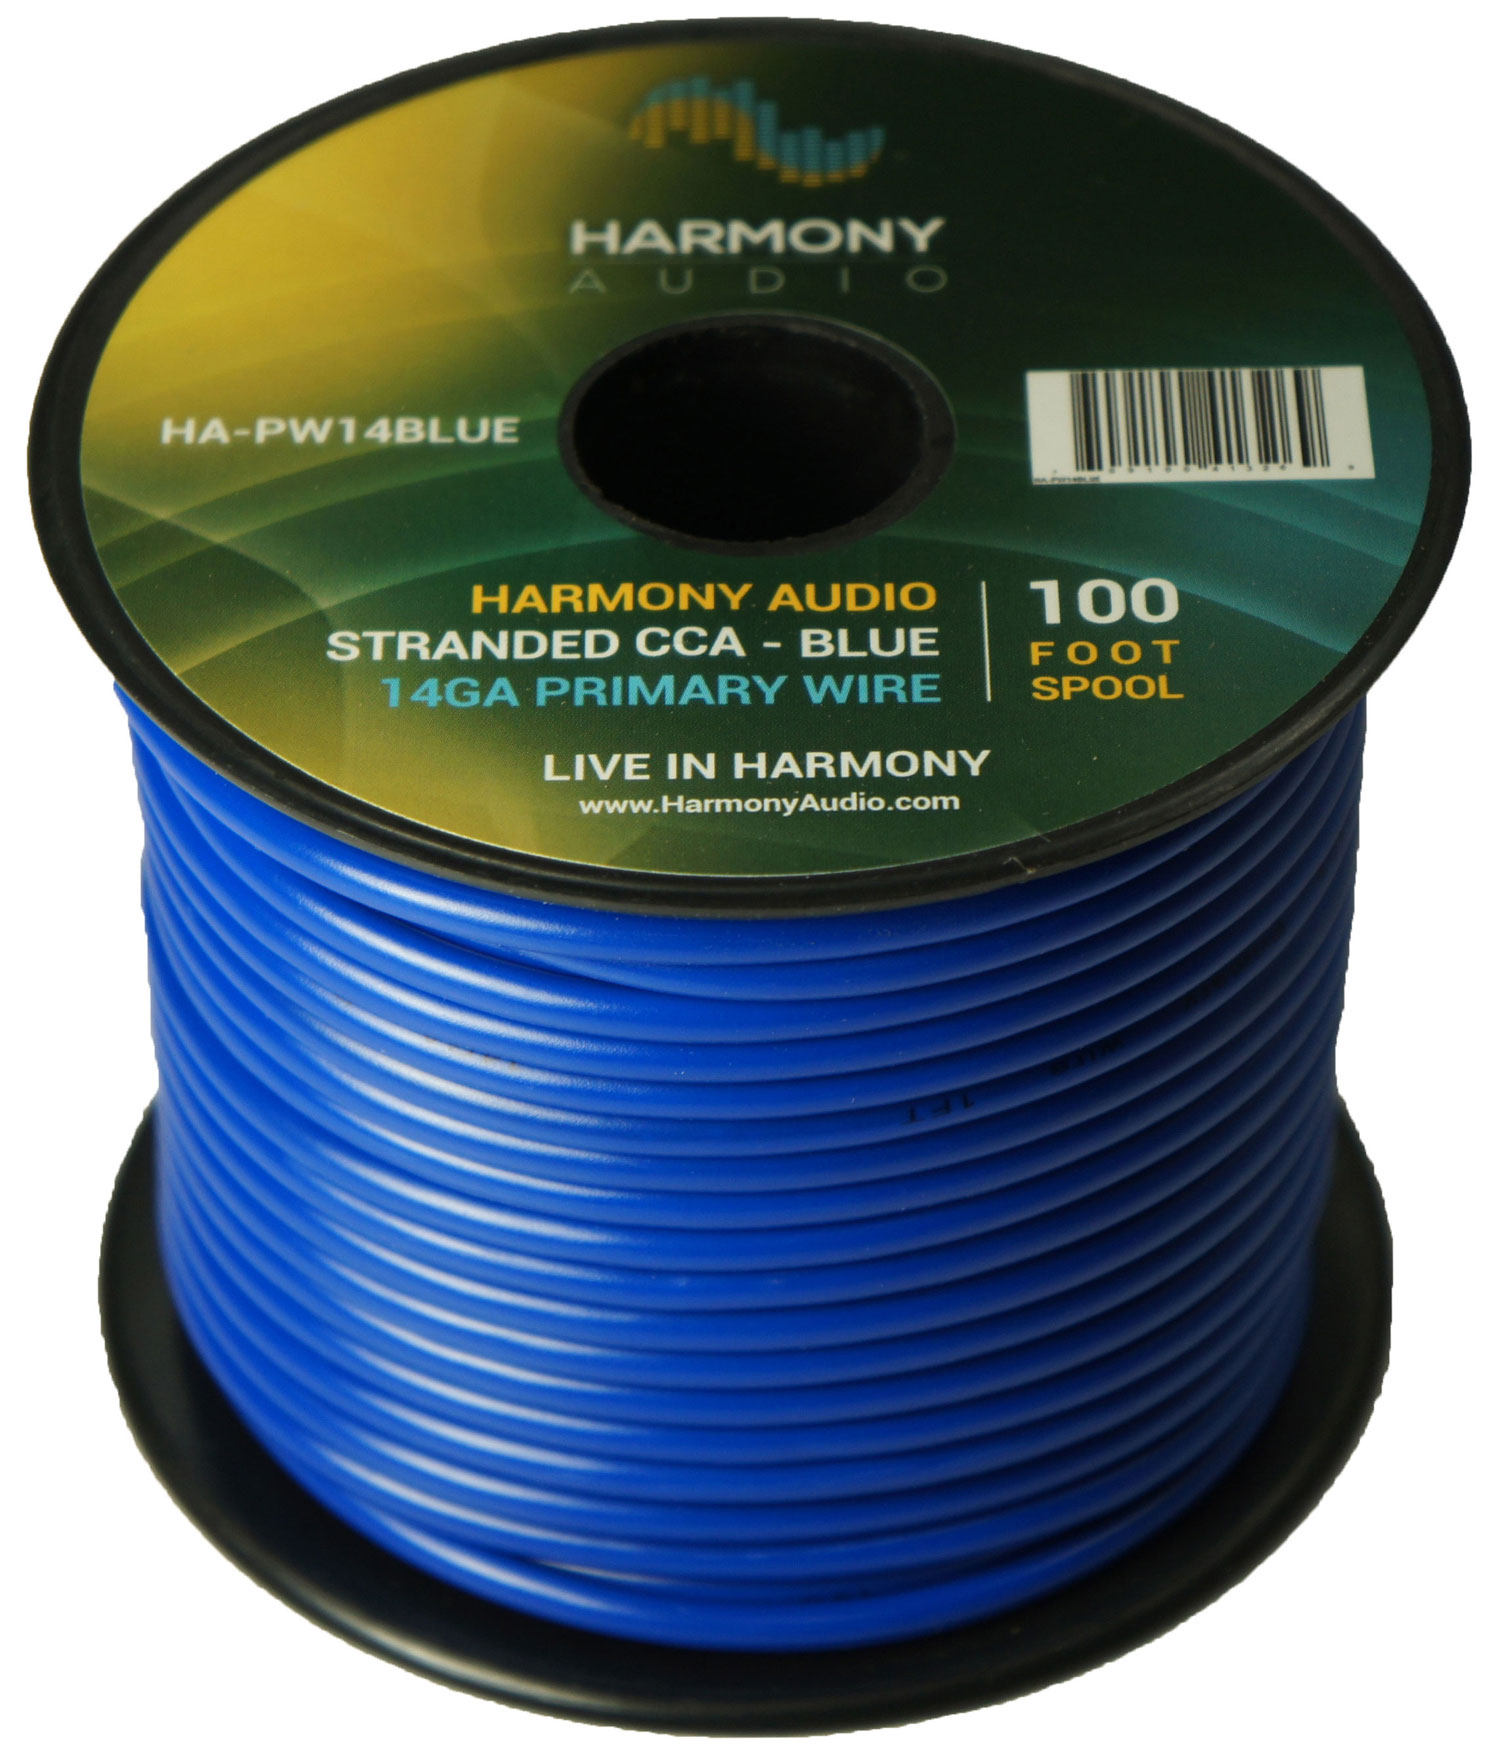 Harmony Audio HA-PW14BLUE Primary Single Conductor 14 Gauge Blue Power or Ground Wire Roll 100 Feet Cable for Car Audio / Trailer / Model Train / Remote